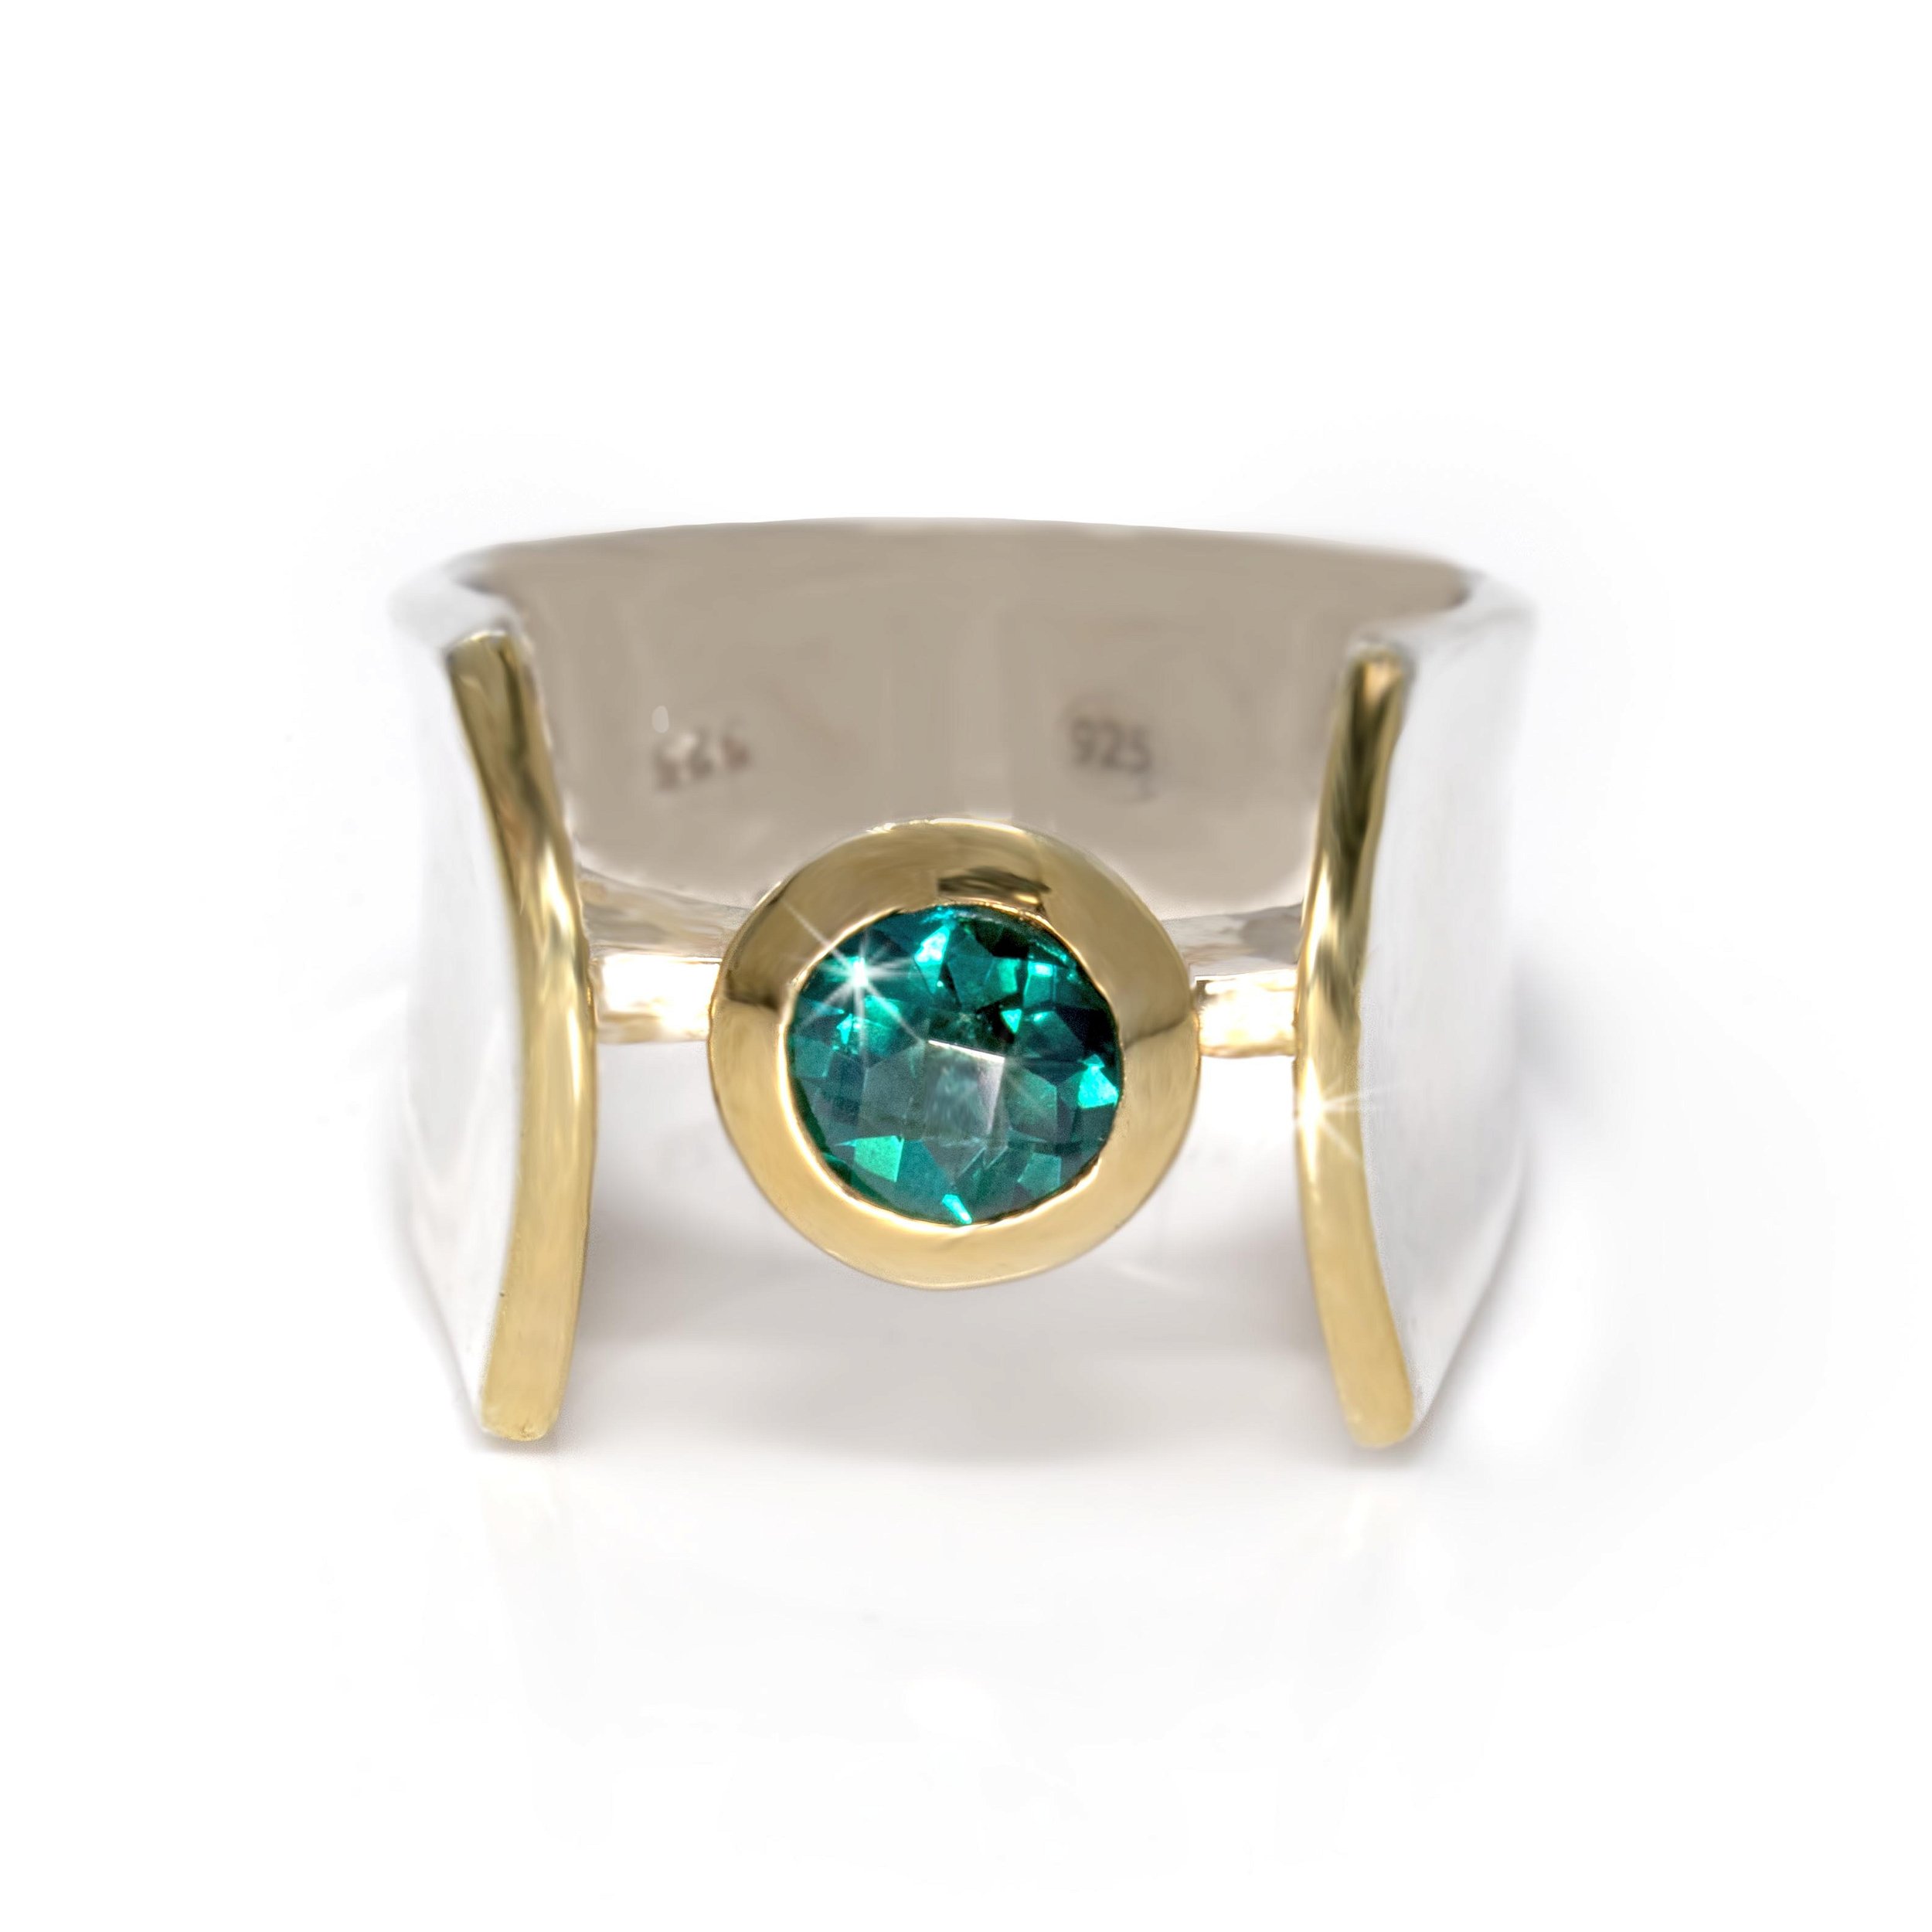 Green Tourmaline Ring Size 8 - Faceted Round Set With Gold Vermeil Bezel In Raised Open Band - Gold Vermeil Accents